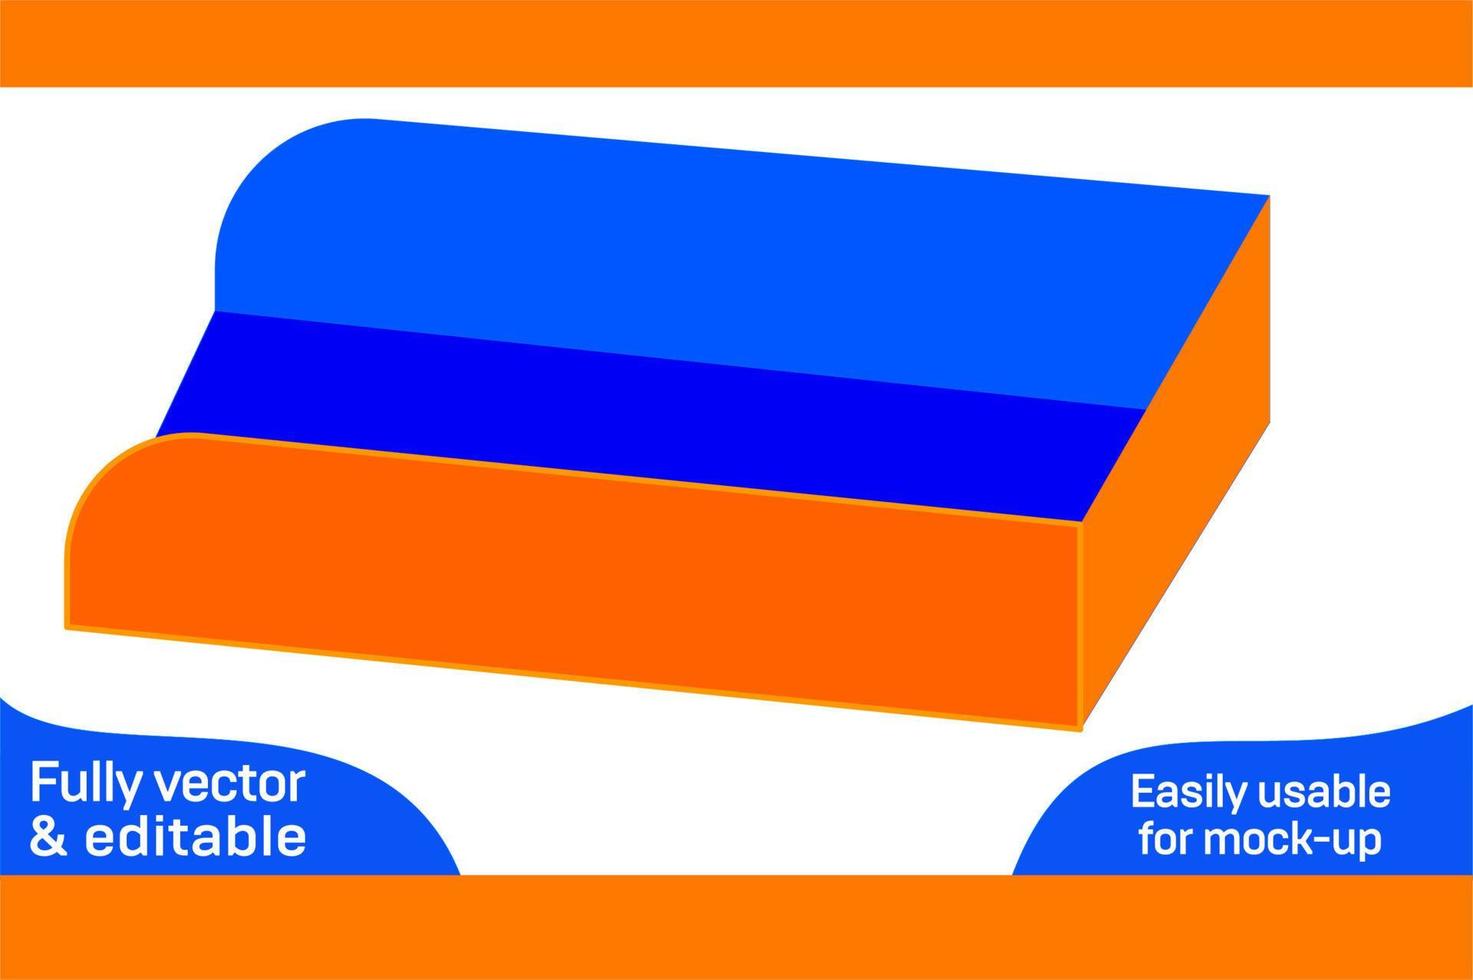 Folding bakery open tray box dieline template and 3D box design 3D box vector